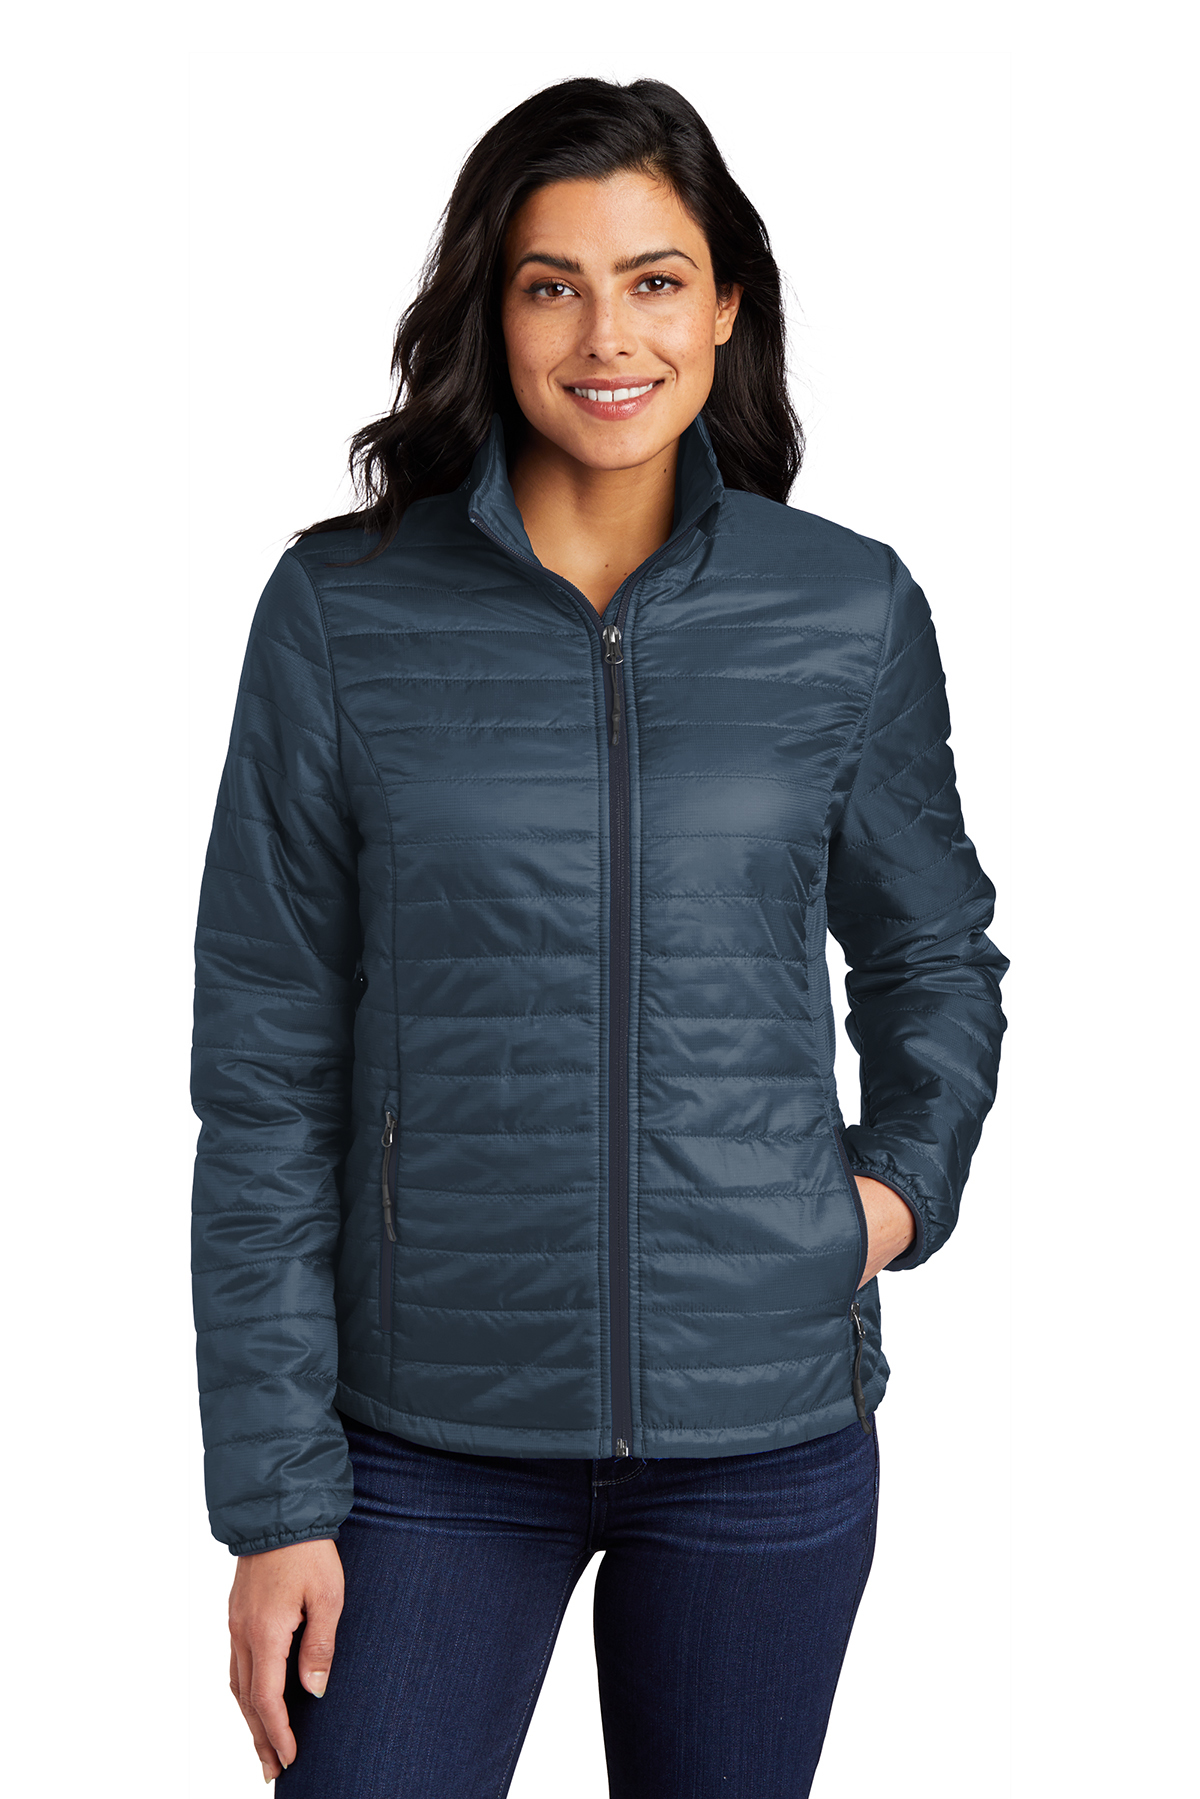 Port Authority Ladies Packable Puffy Jacket, Product